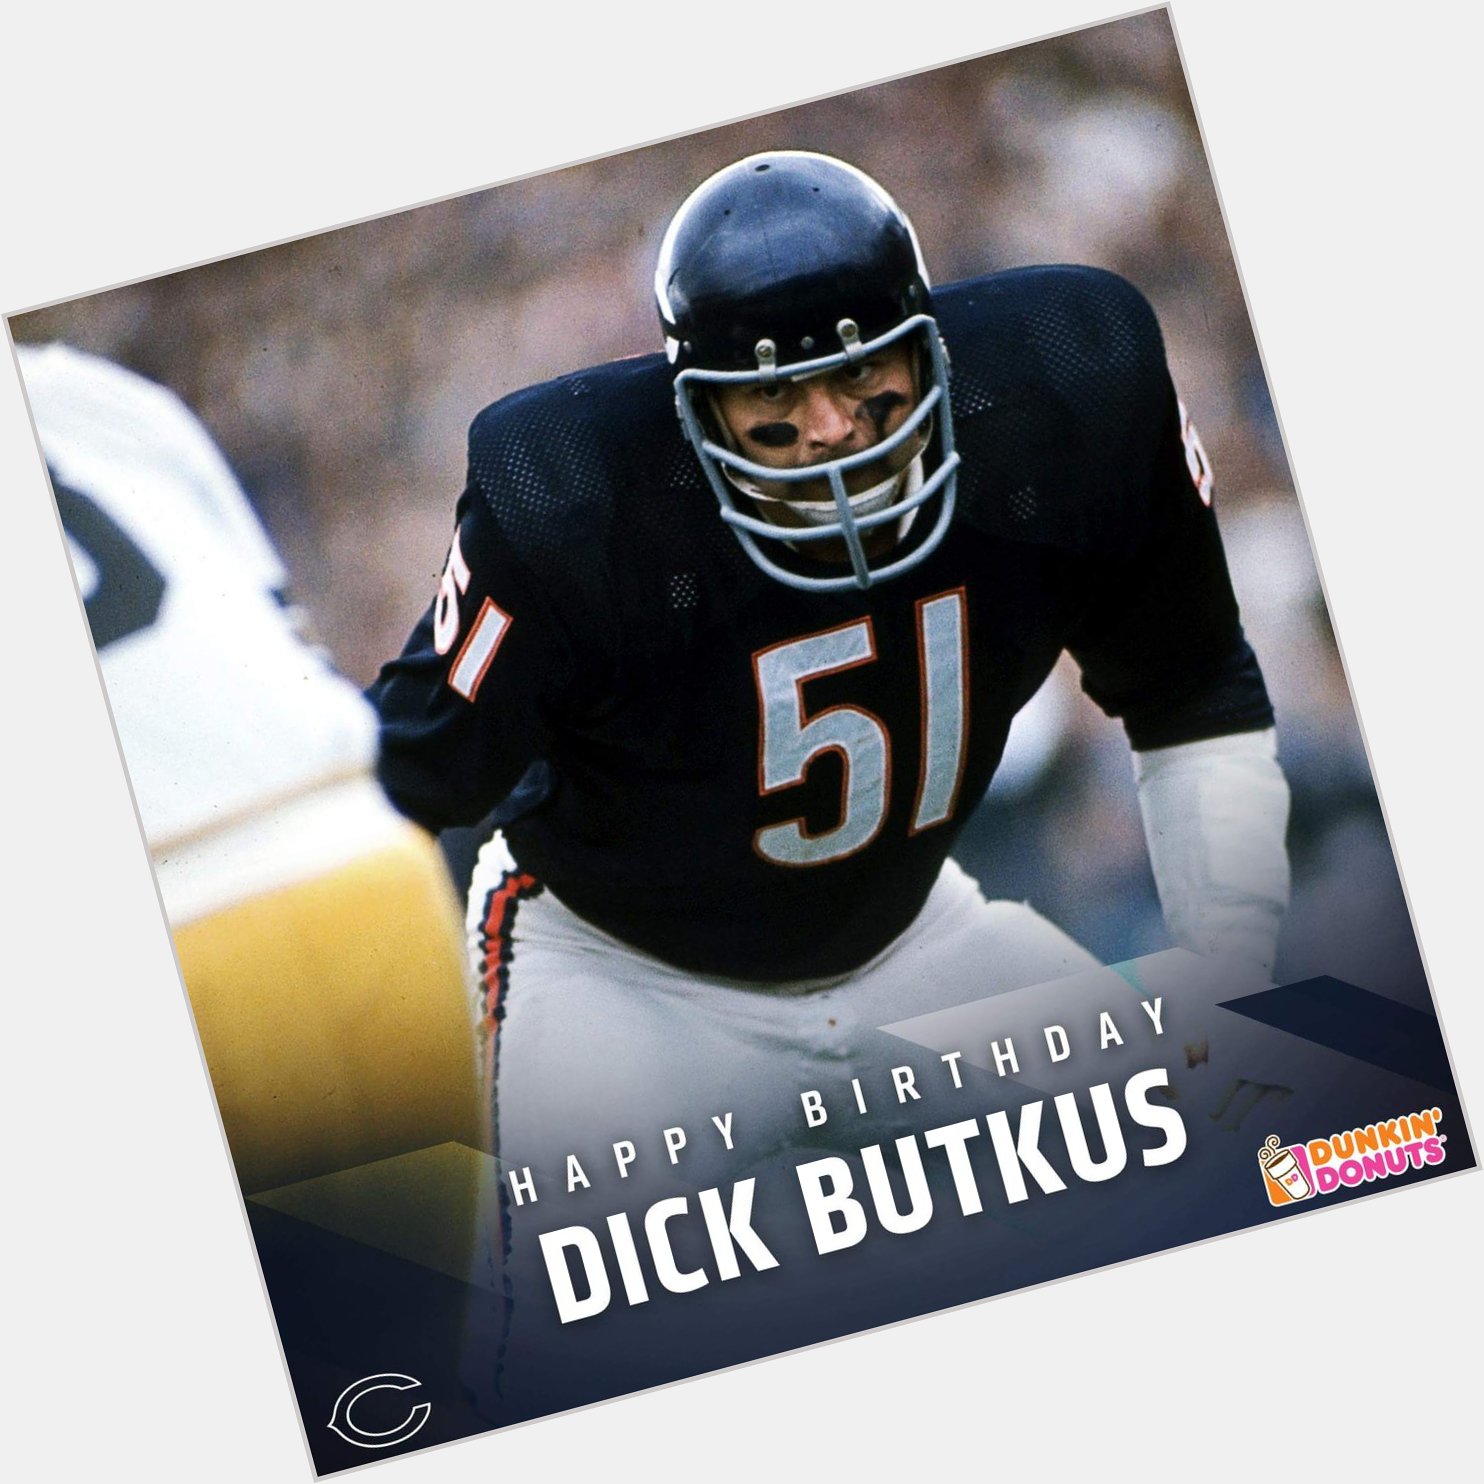 Going to watch the tomorrow, and wanted to wish Dick Butkus a happy birthday today. 